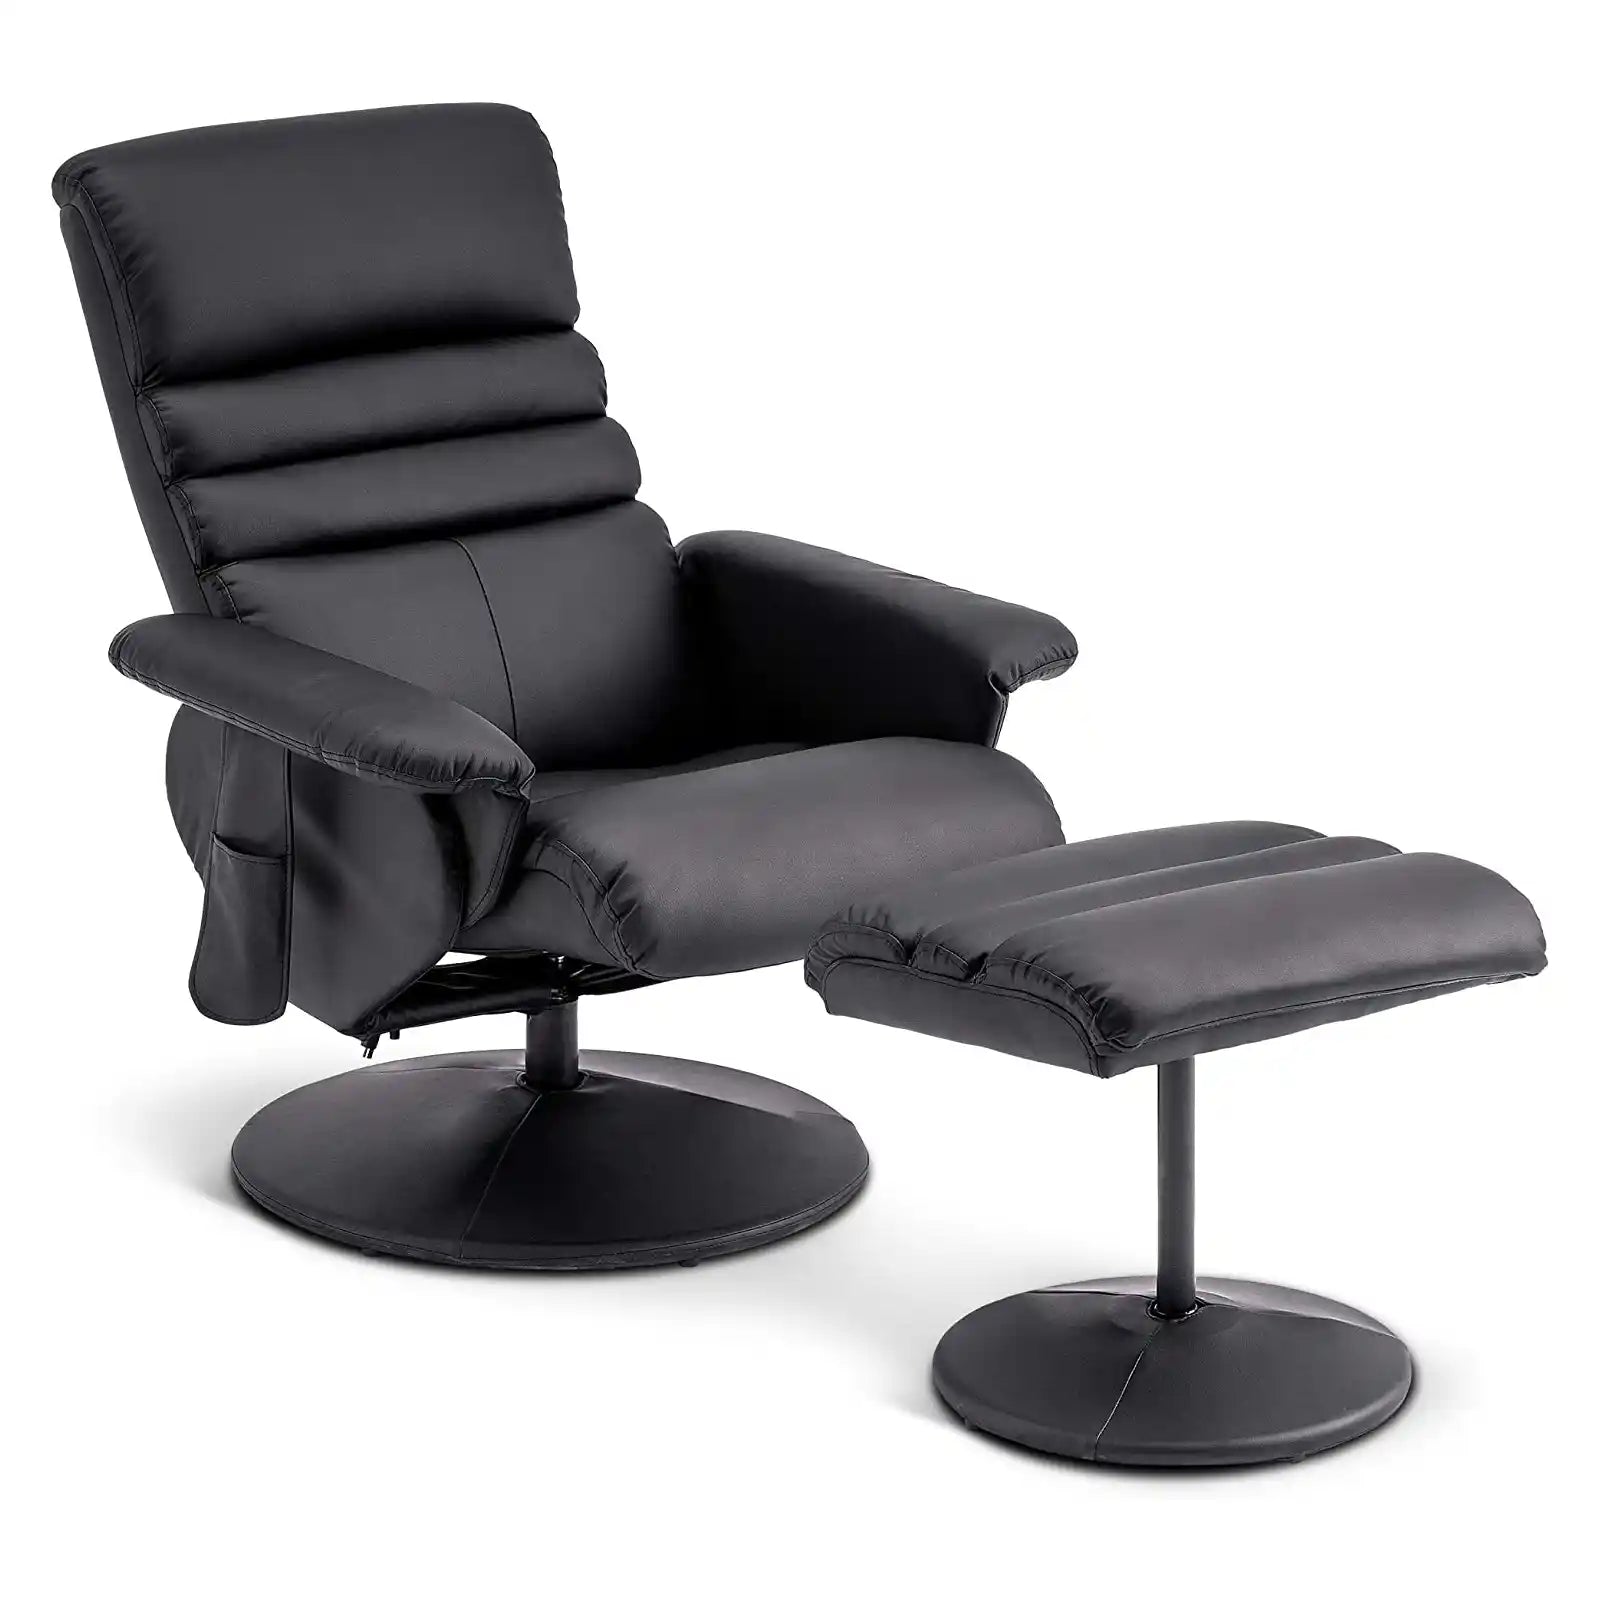 Recliner with Ottoman, Reclining Chair with Massage